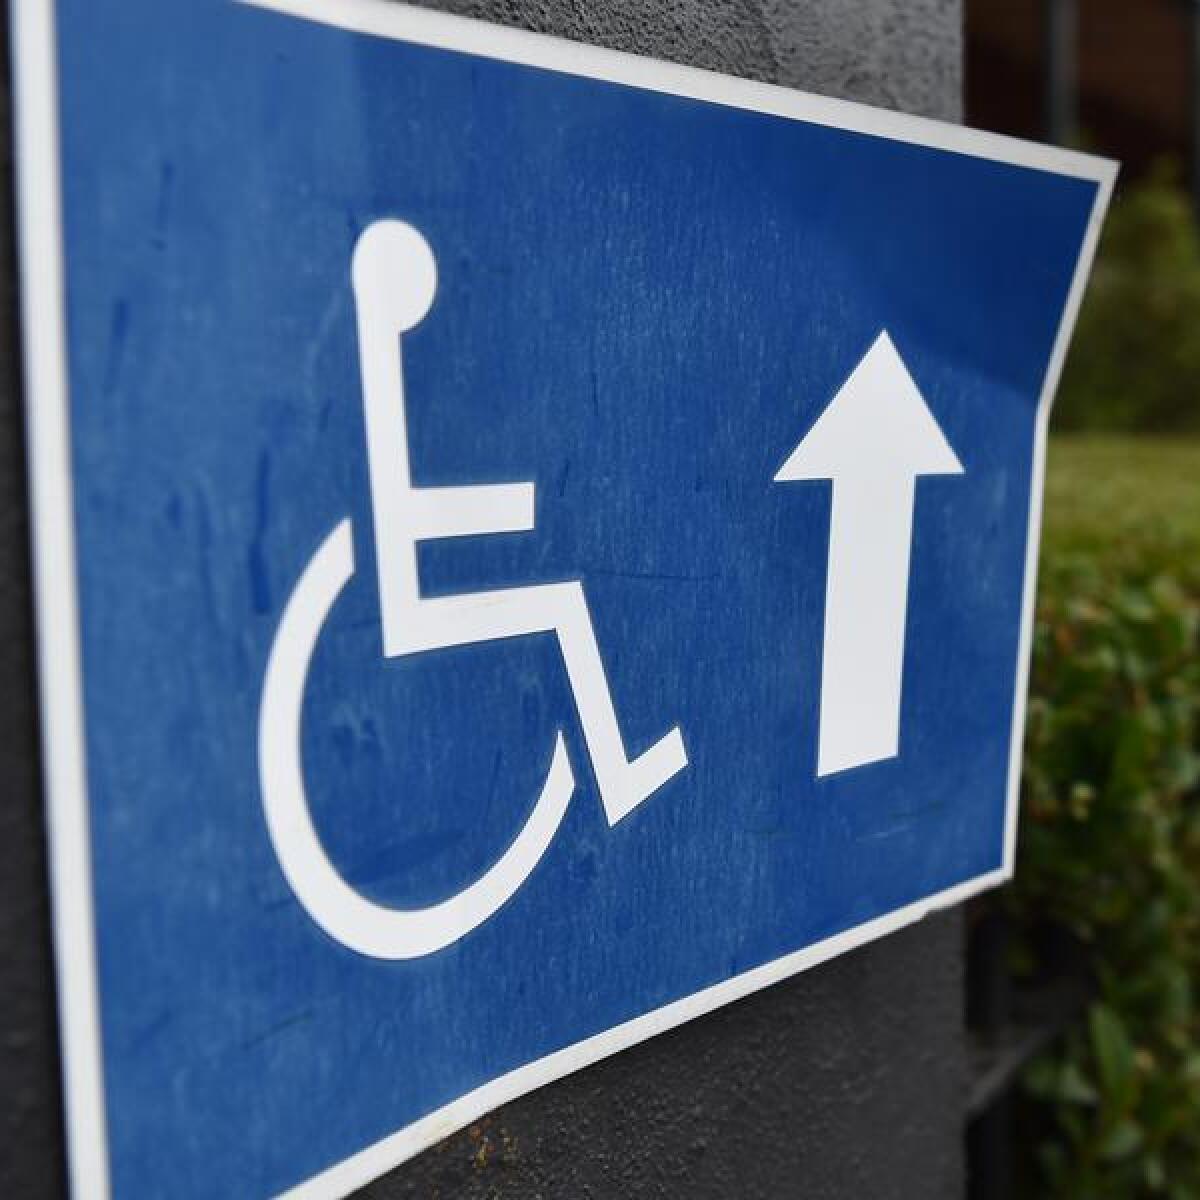 A disability sign.